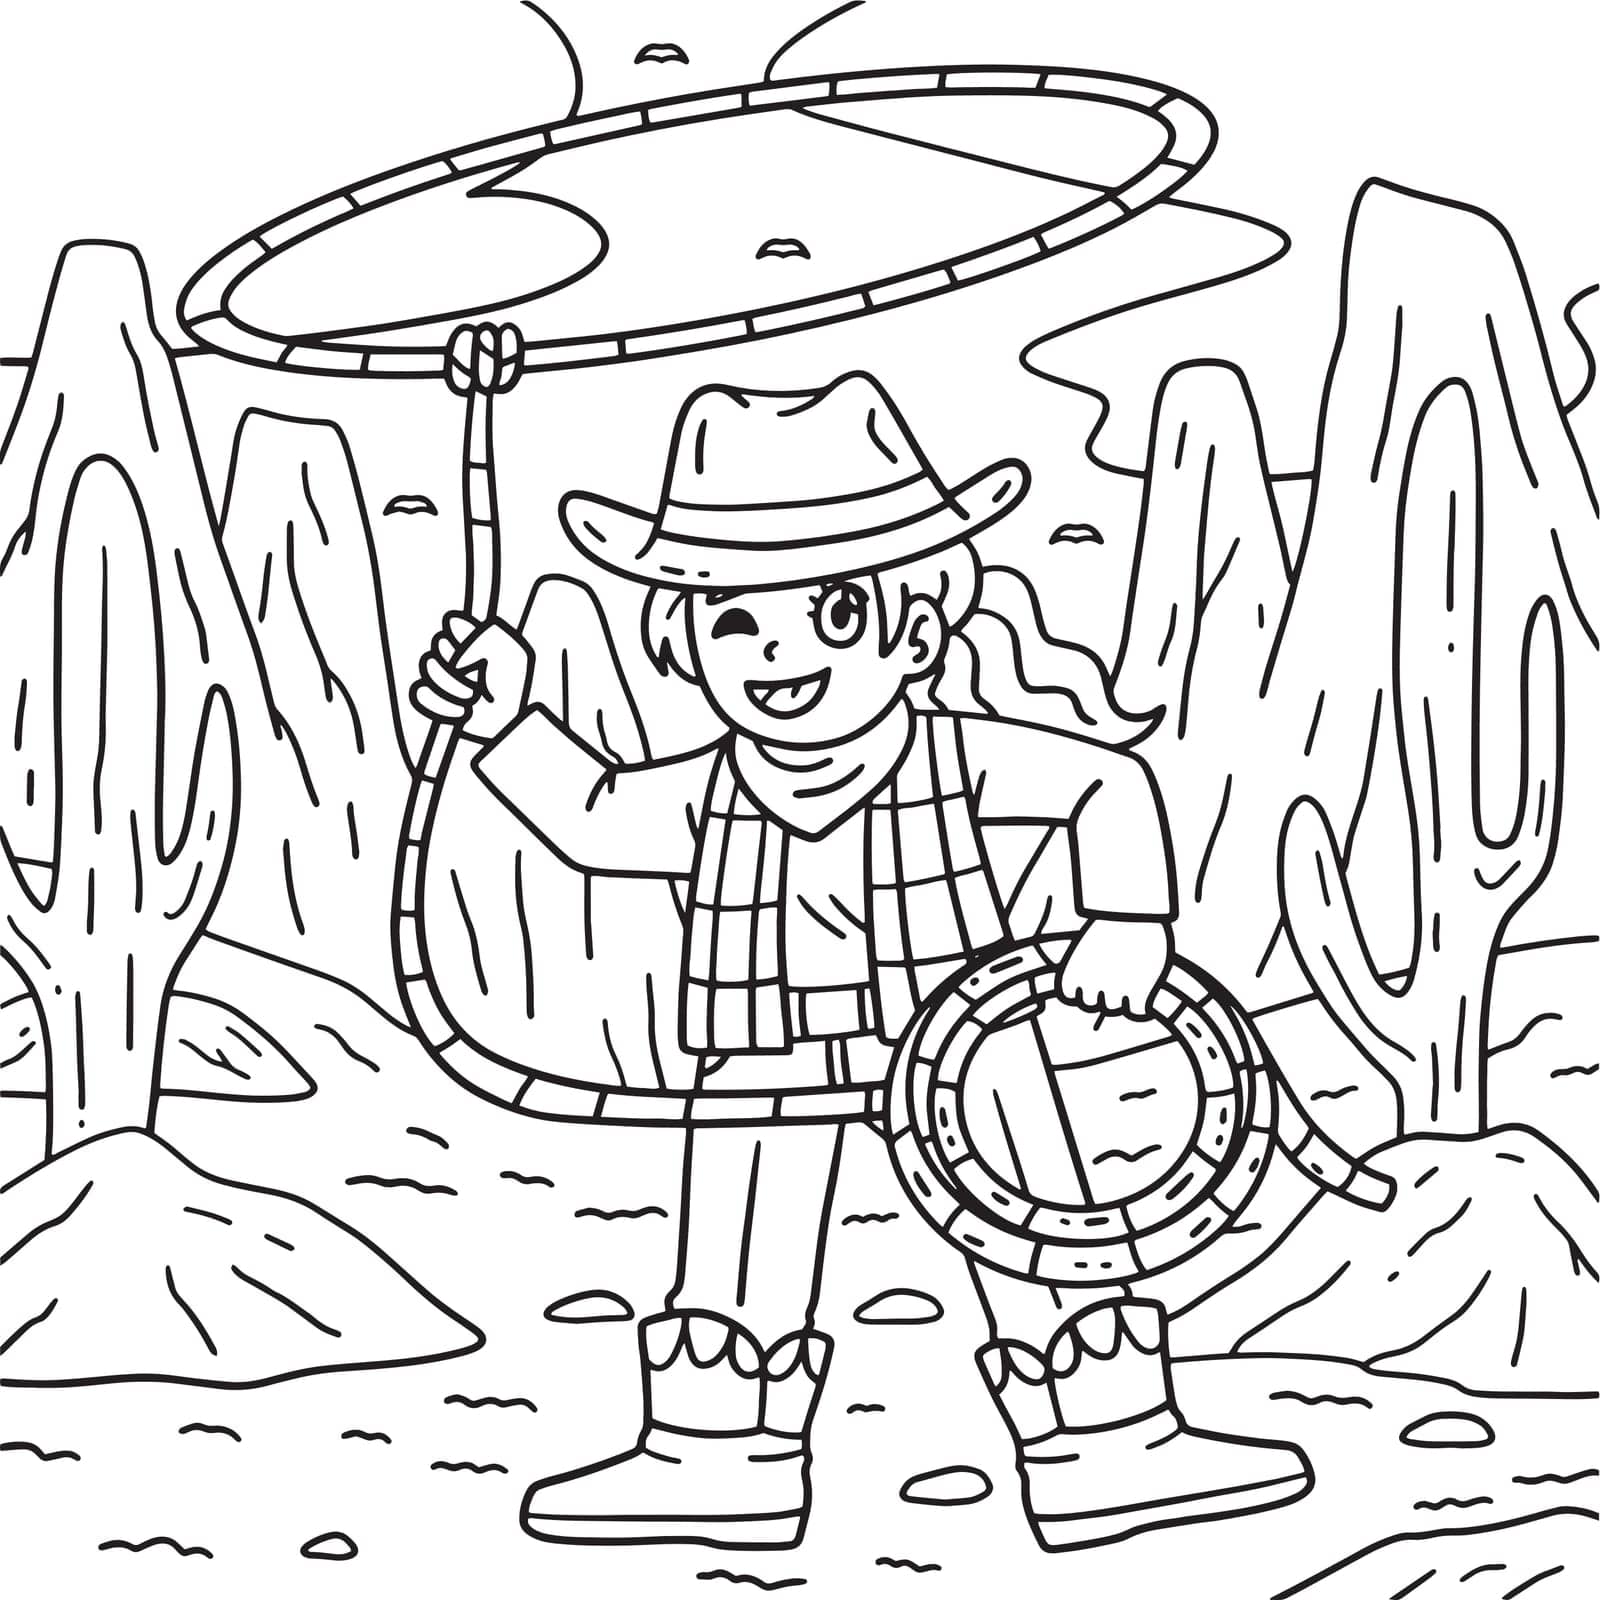 A cute and funny coloring page of a Cowgirl with Lasso. Provides hours of coloring fun for children. To color, this page is very easy. Suitable for little kids and toddlers.